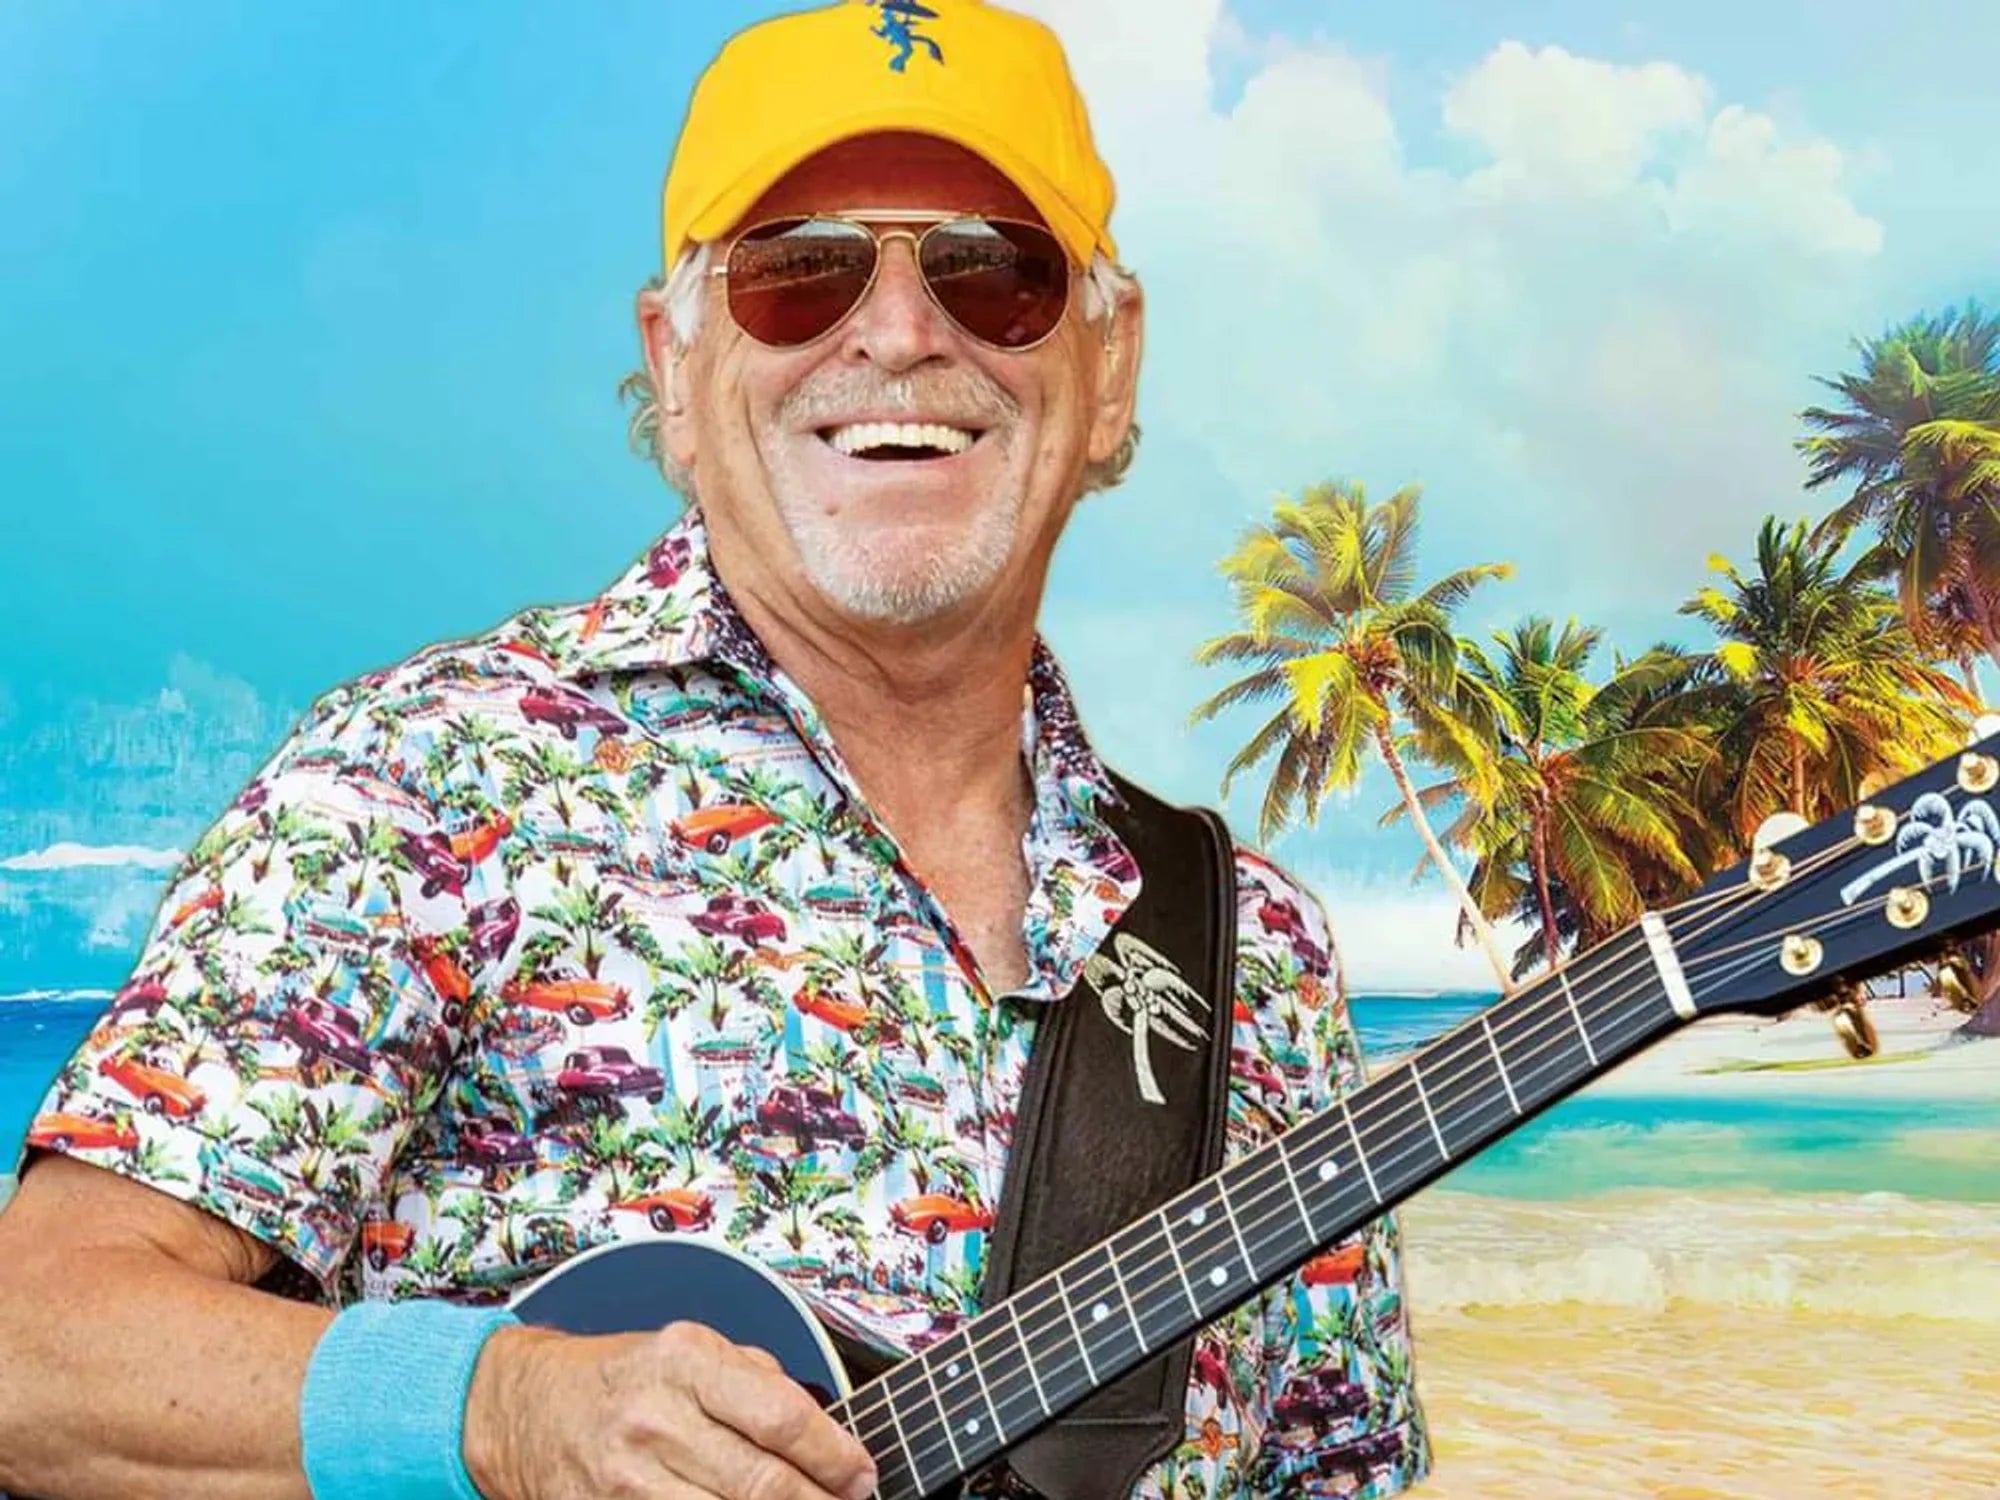 Sad Farewell to the Beloved Jimmy Buffet - He Will Be Greatly Missed